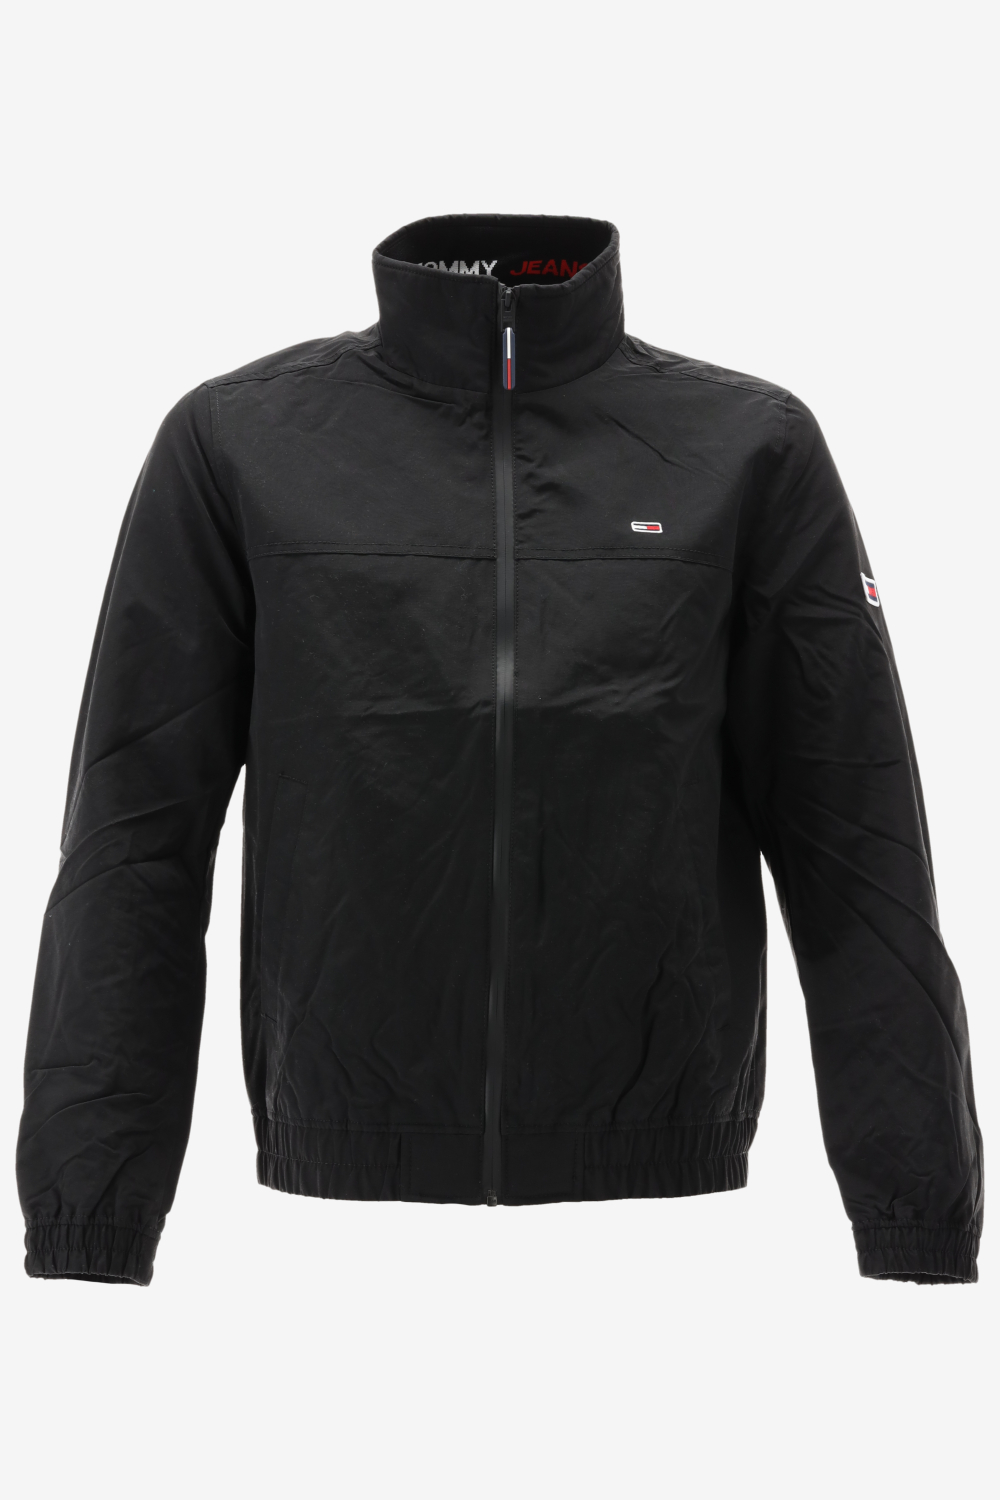 TOMMY JEANS Essential Casual Bomber Jas Heren - Black - L